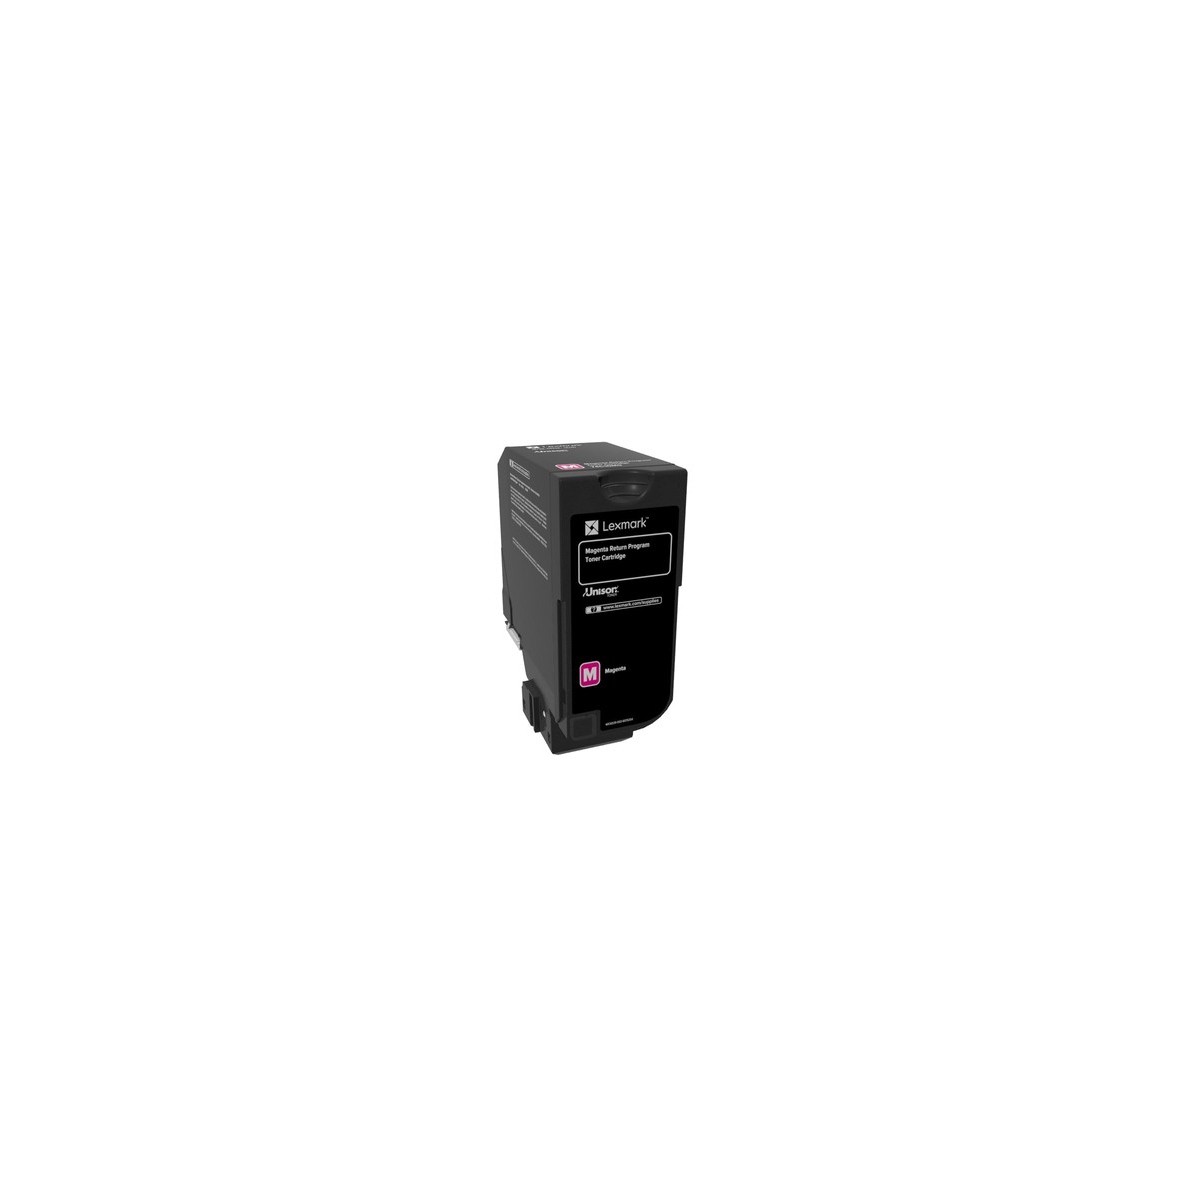 Lexmark 74C20M0 - 3000 pages - Magenta - 1 pc(s)